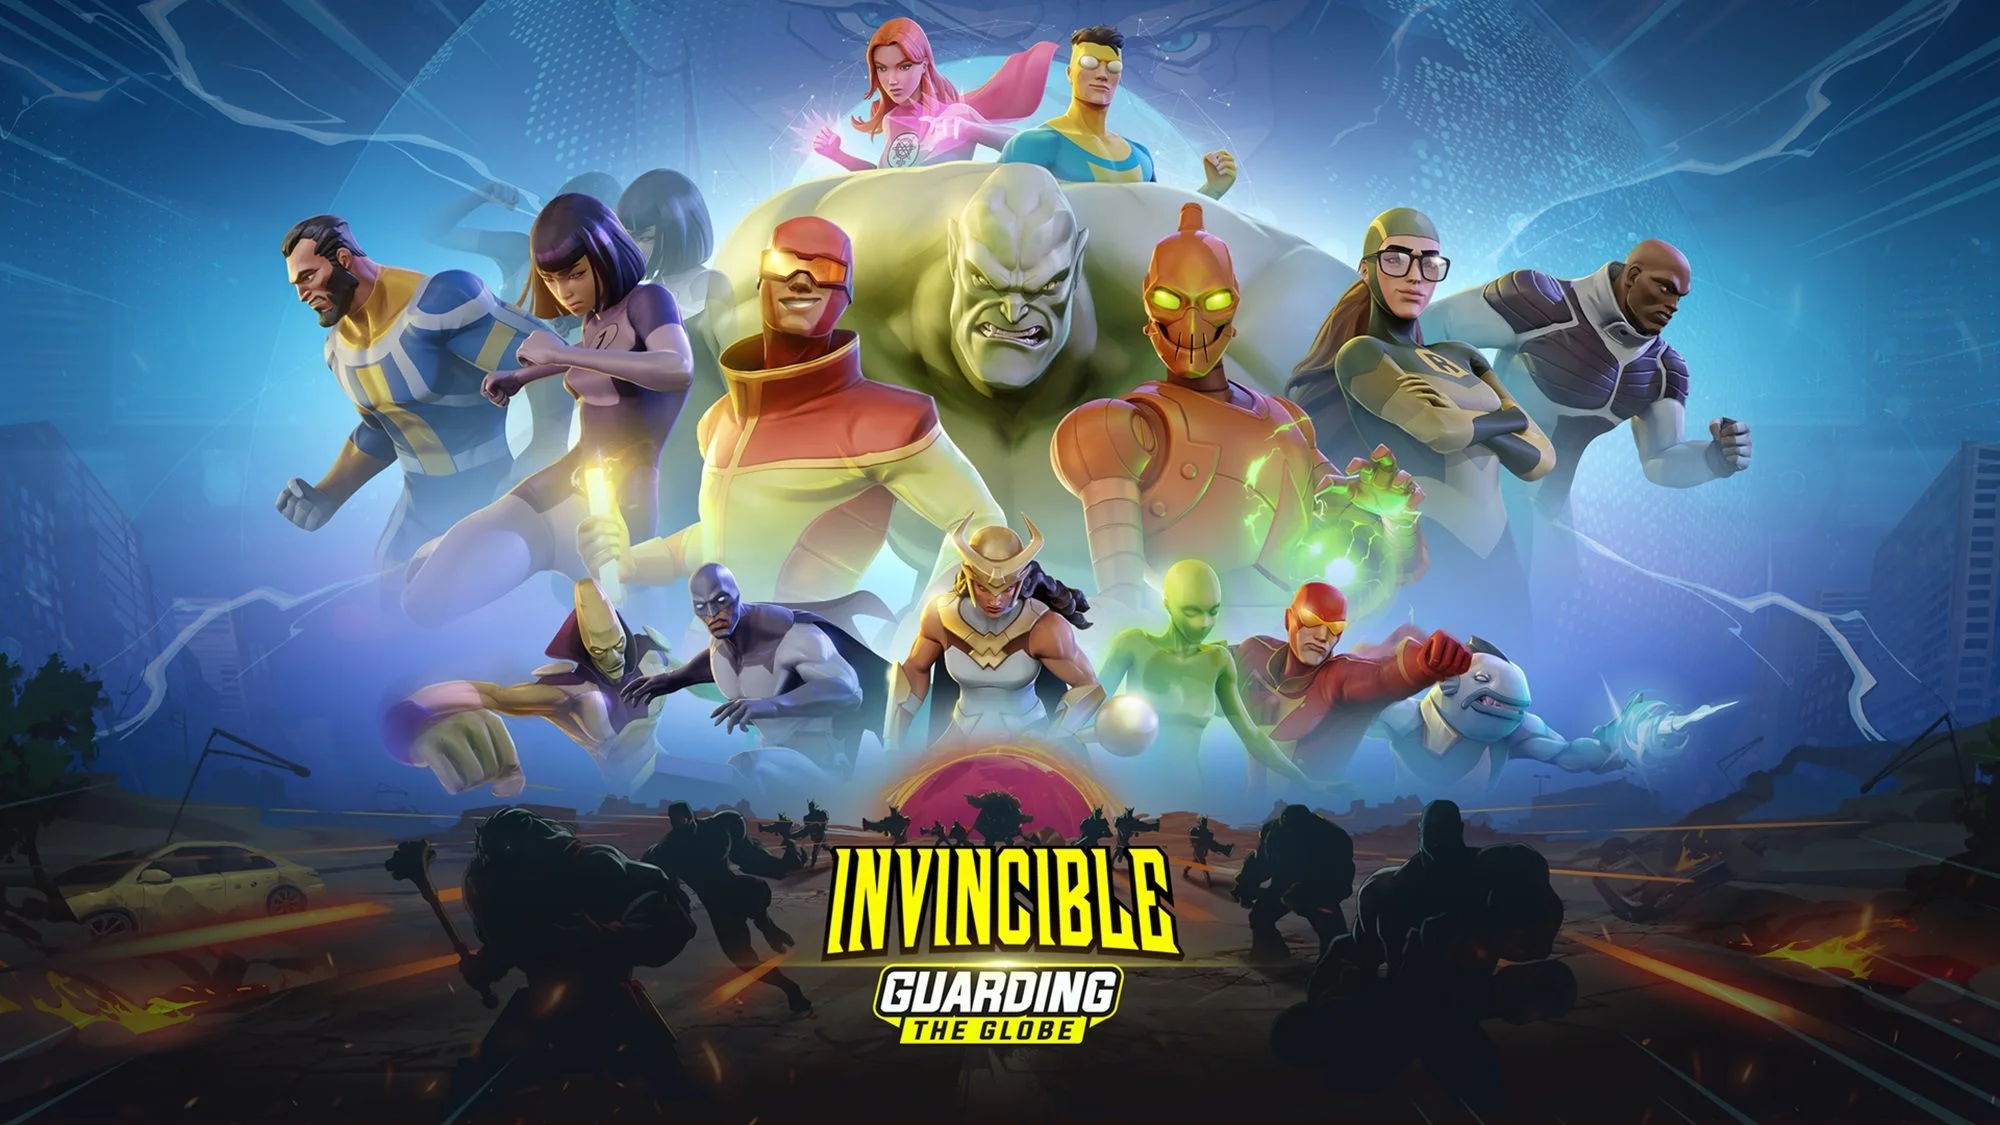 A mobile game based on the animated series and comics Invincible has been released